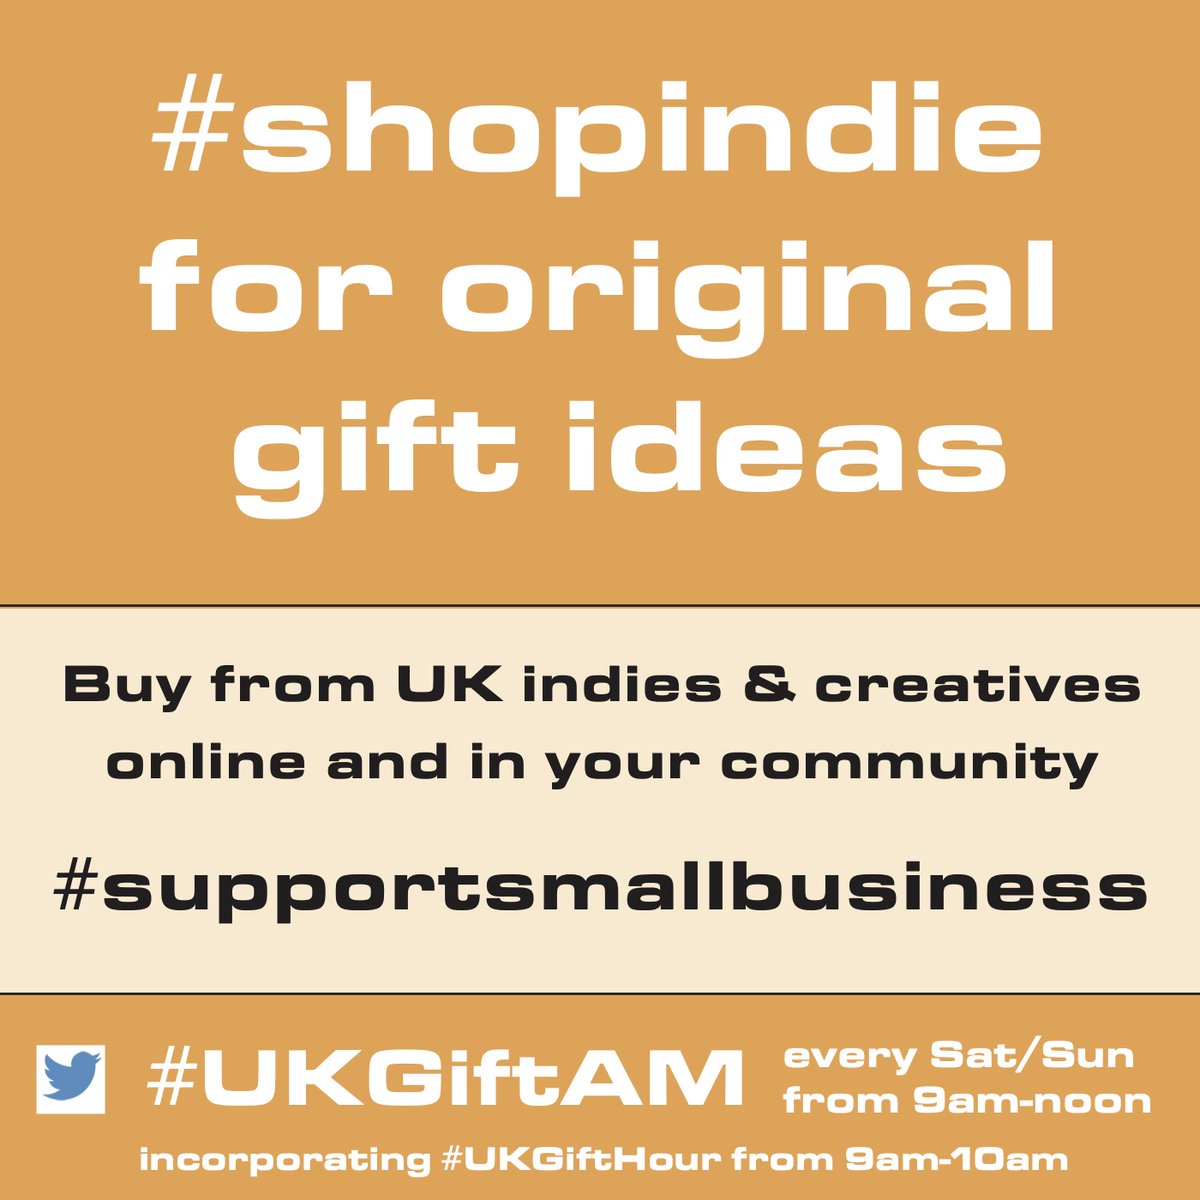 It's #SaturdayMorning, it's 9am, time to join the #shopindie trend! #UKGiftHour #UKGIftAM is open highlighting #giftideas with a difference from UK indies & creatives. Share, share, share to spread the #supportsmallbusiness message for all 🤗🎁 #planahead #giftfinder